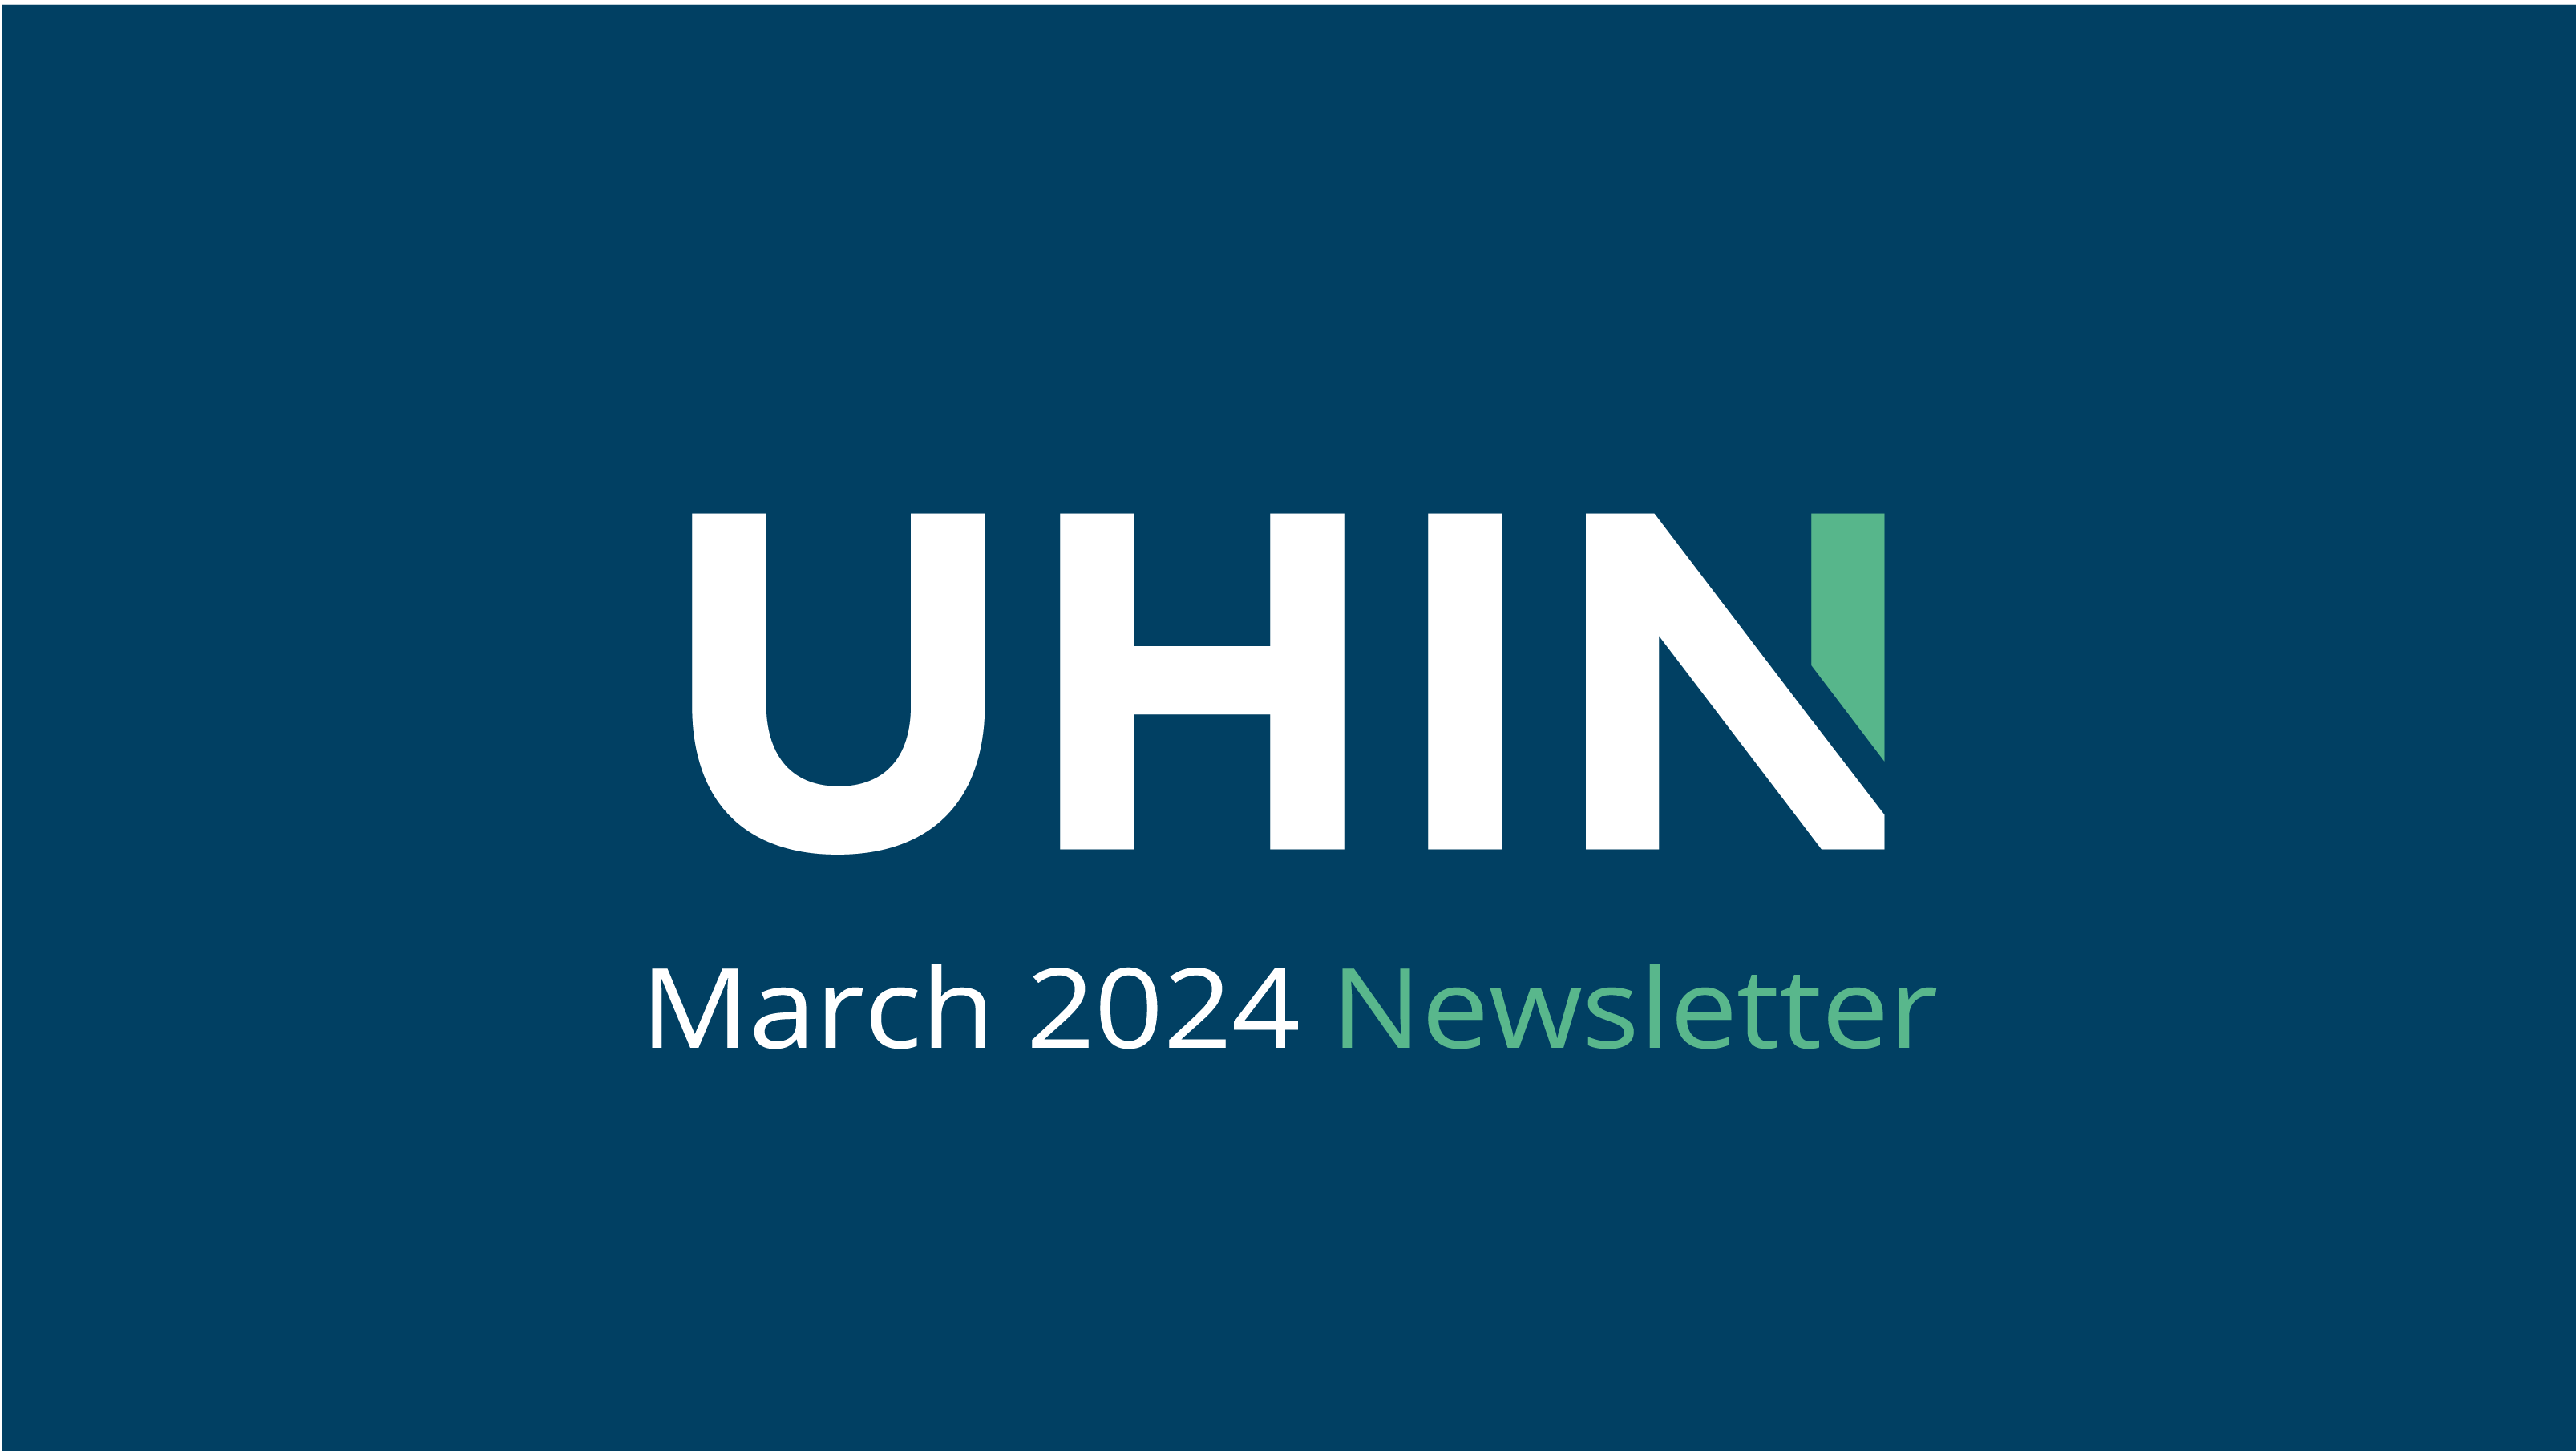 Newsletter: March 2024 Issue